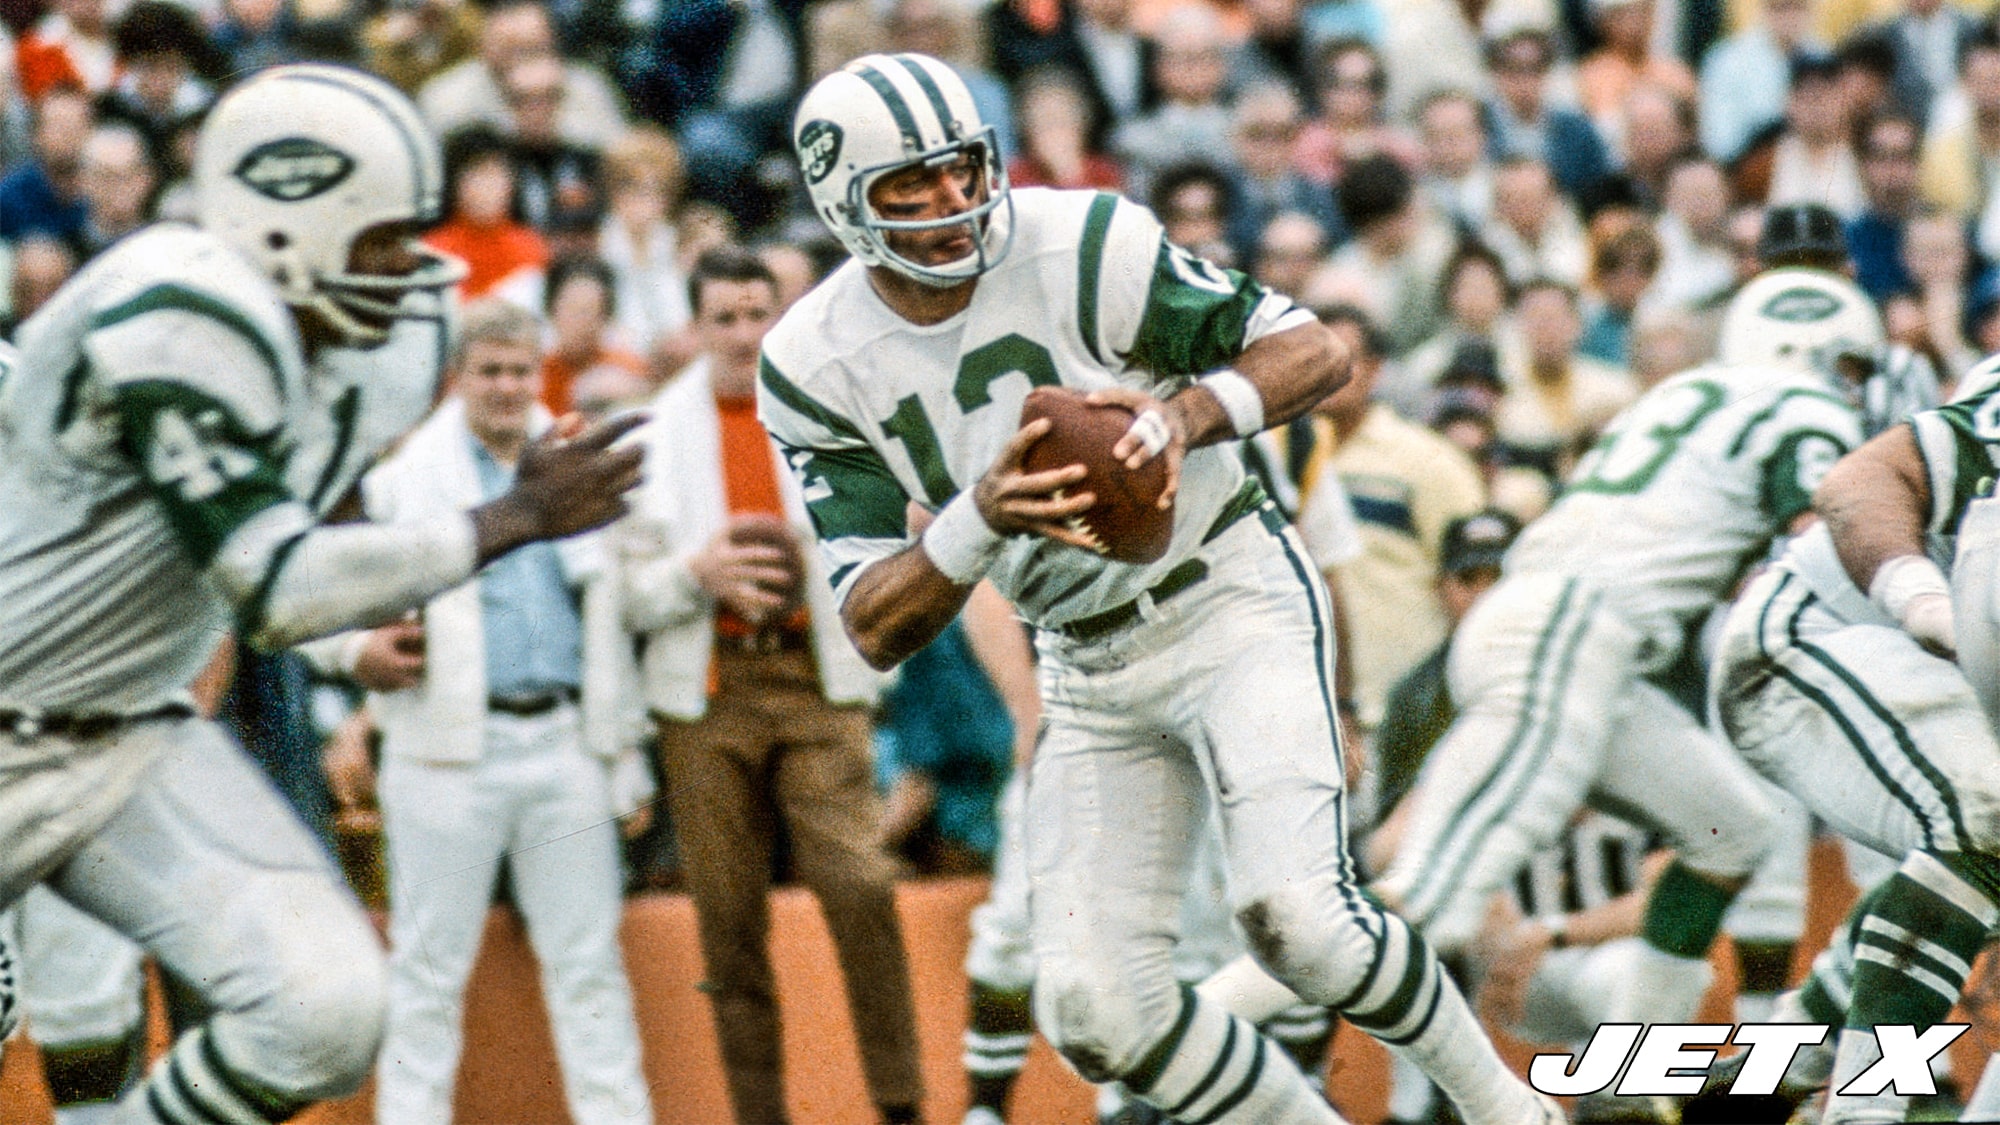 MIAMI, FL - JANUARY 12: Joe Namath #12 of the New York Jets drops back to pass against the Baltimore Colts during Super Bowl III at the Orange Bowl on January 12, 1969 in Miami, Florida. The Jets defeated the Colts 16-7.